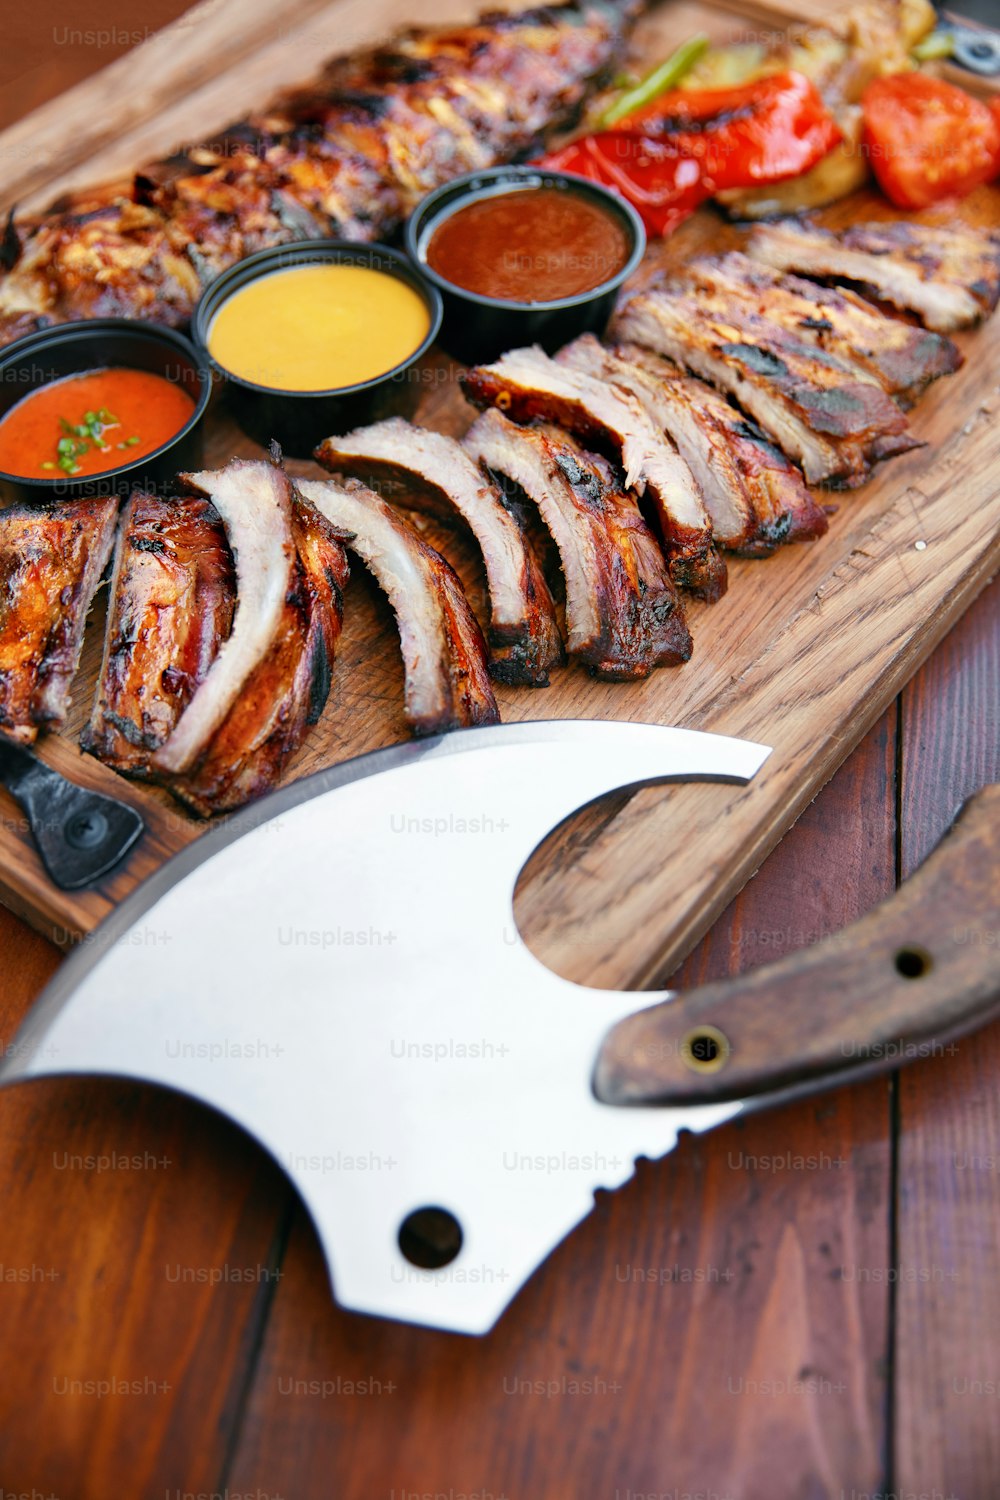 Food In Restaurant. Grill Ribs And Sauces On Wooden Tray. Ax For Cutting Pork Ribs. High Resolution